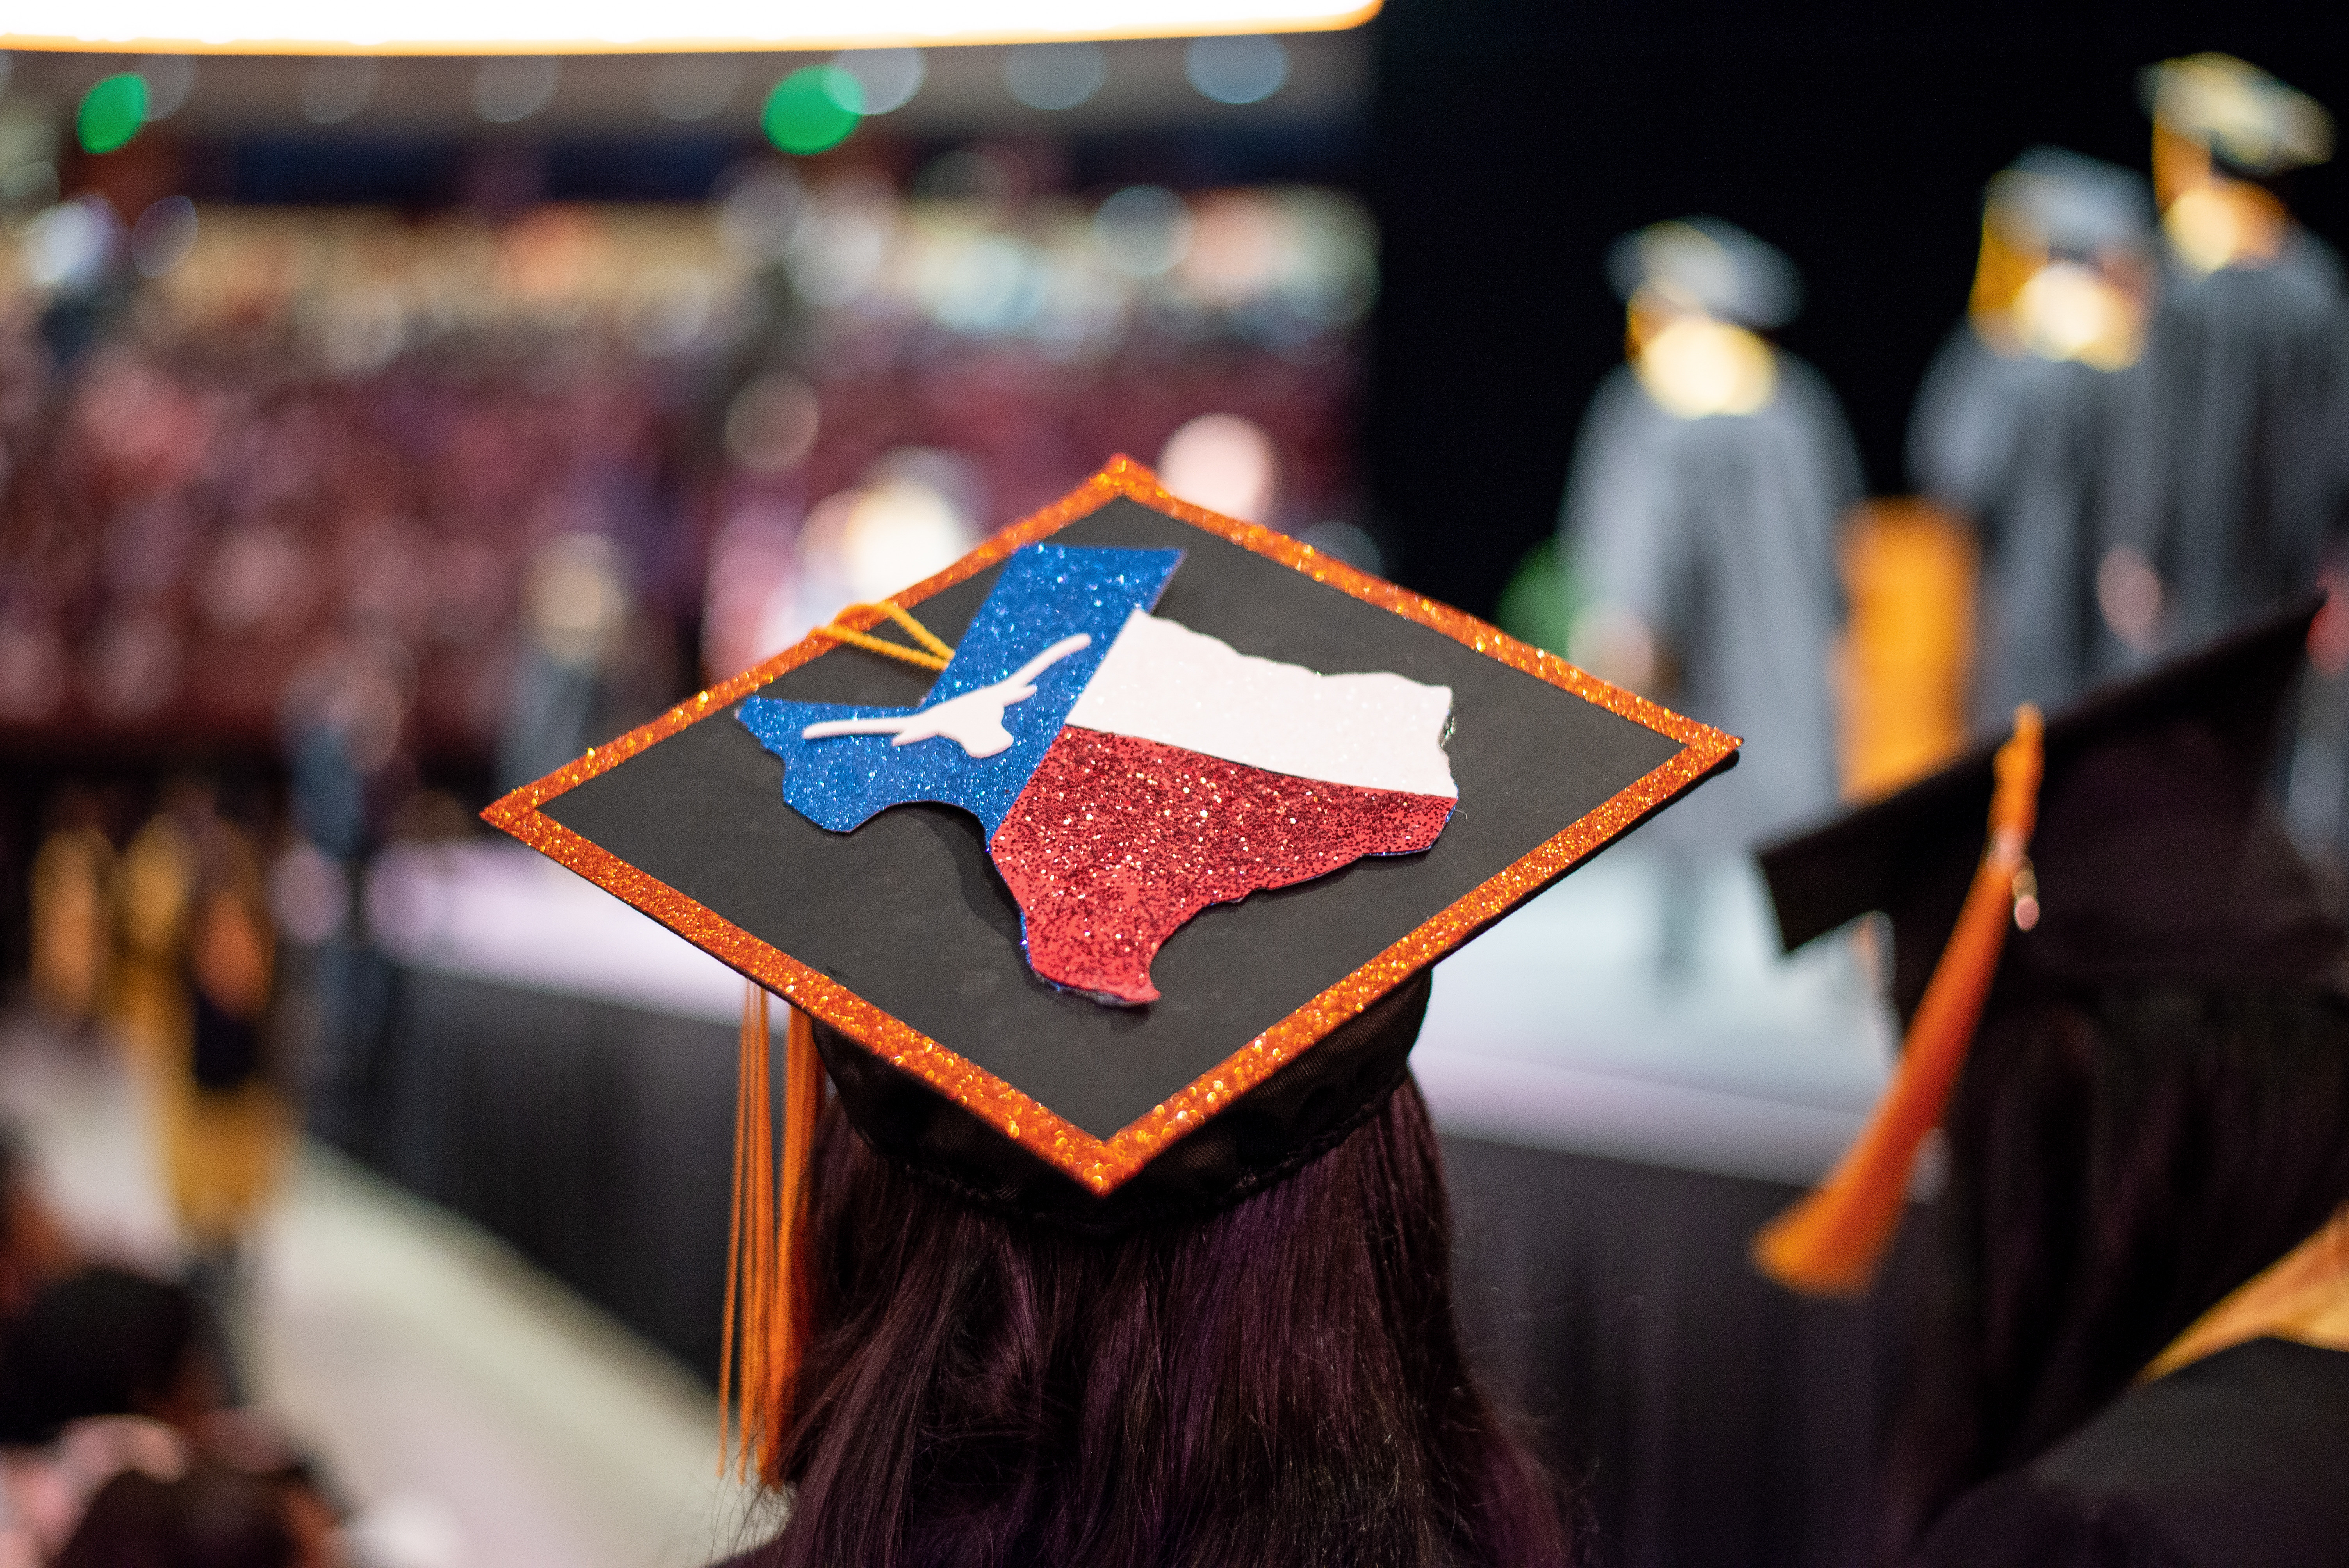 A decorated graduation cap seen from behind is lined in burnt orange with the shape of Texas and Texas flag with a UT longhorn where the star of Texas would be. The graduate is looking on as others cross the graduation stage.